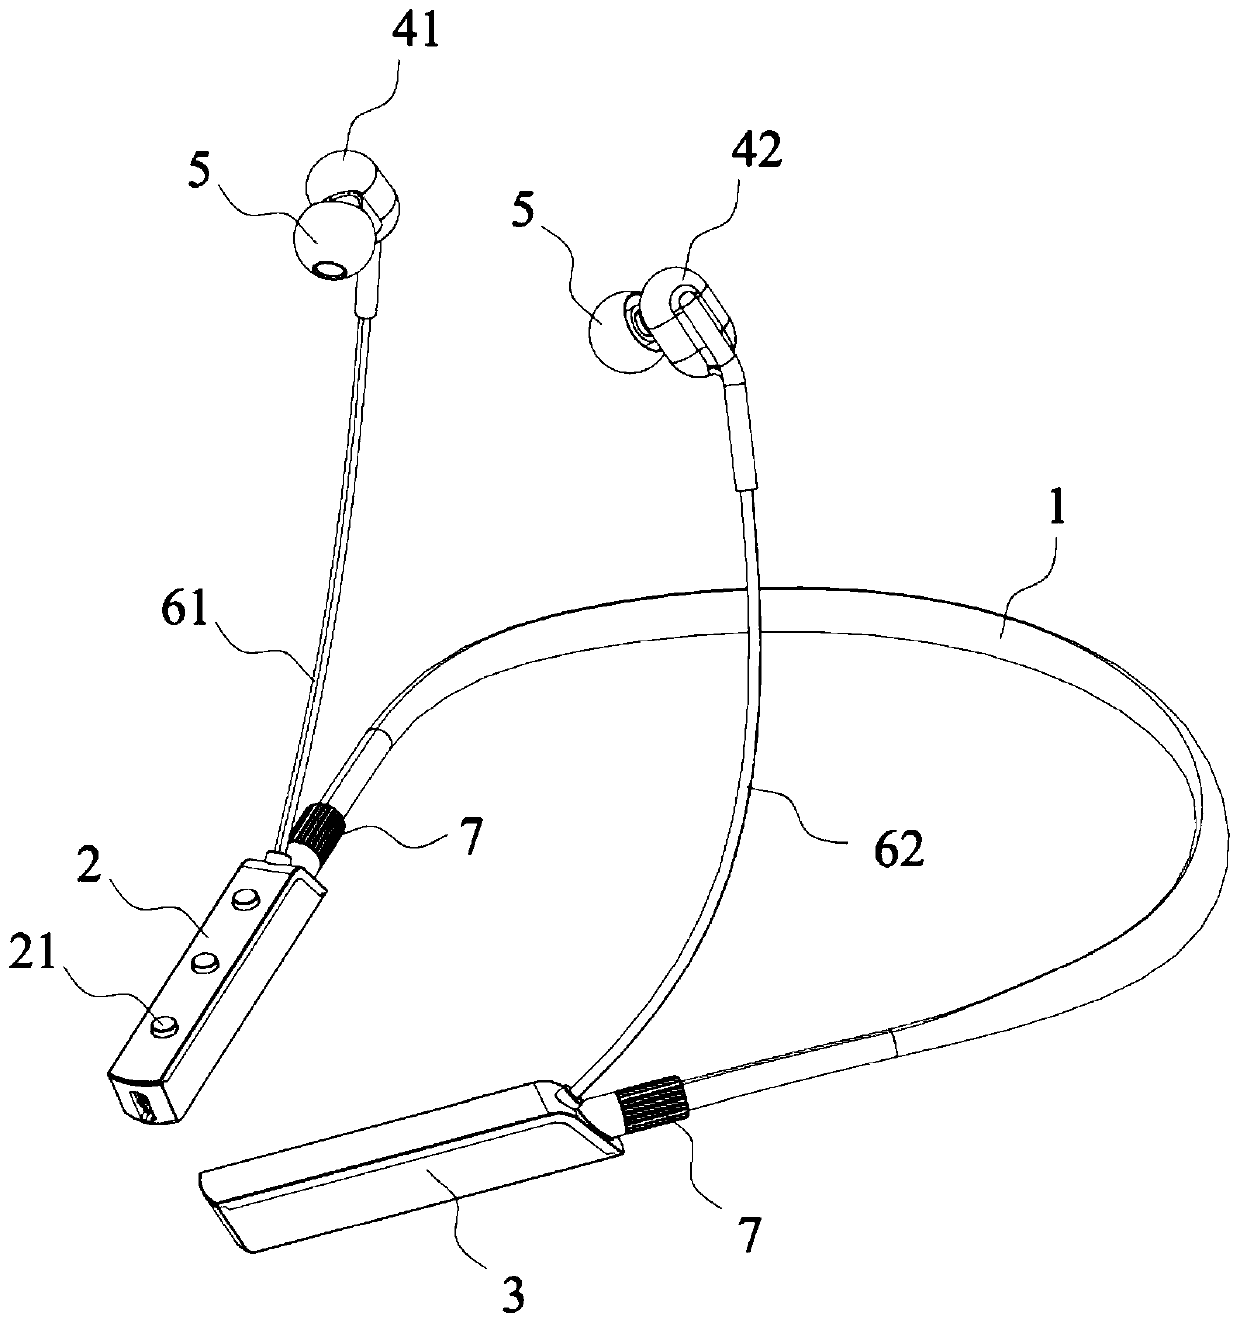 A connecting structure of a neckband Bluetooth earphone and the neckband Bluetooth earphone